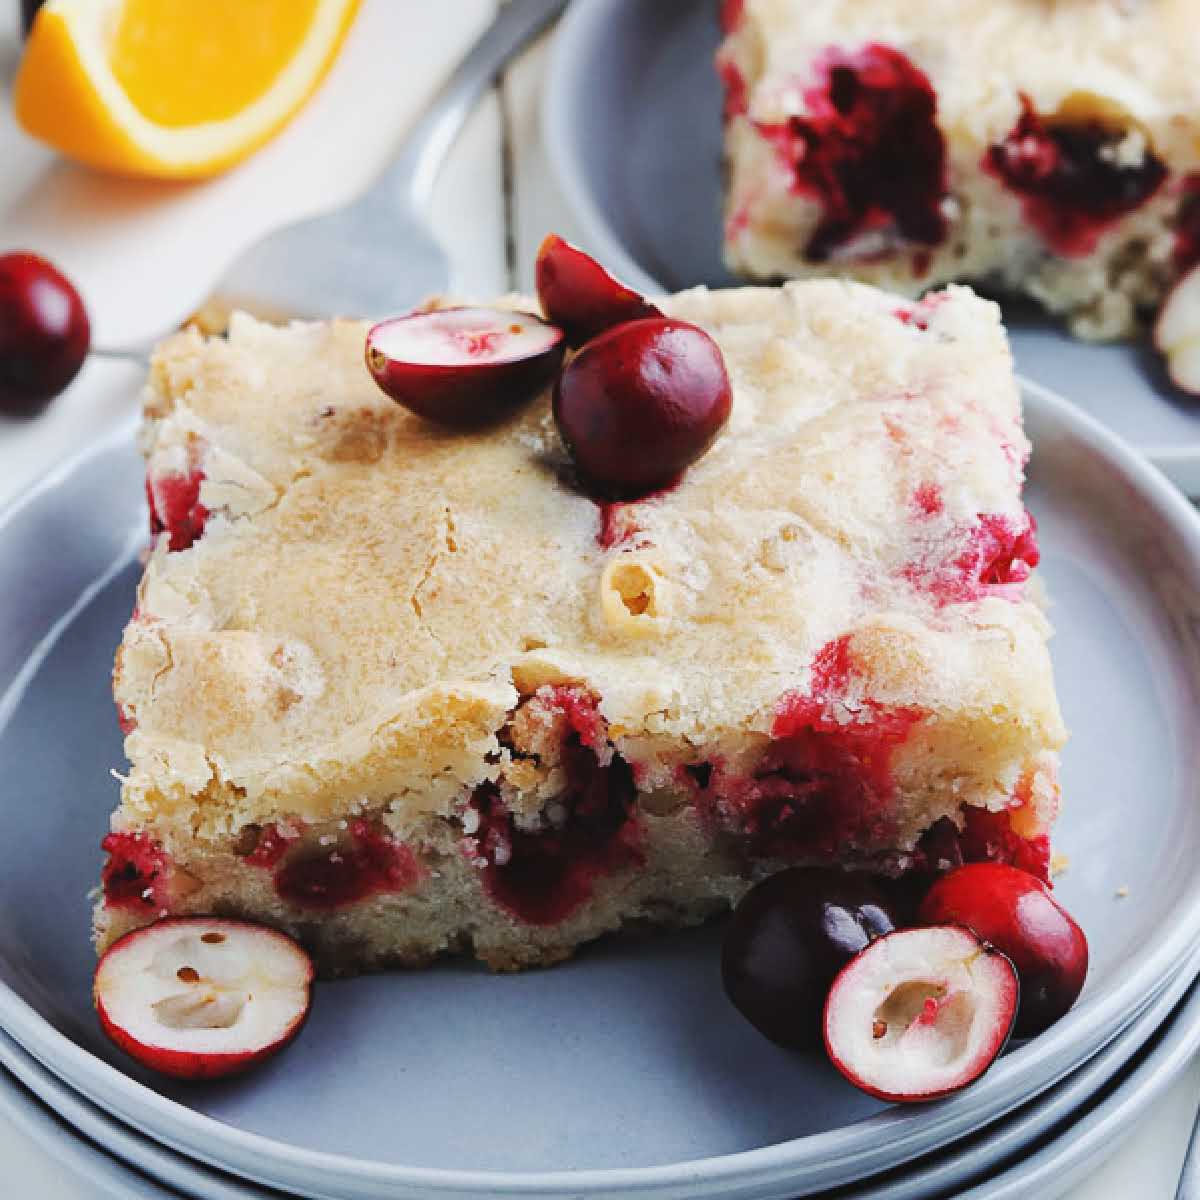 Closeup view of a slice of Cranberry Orange Cake on a gray plate.